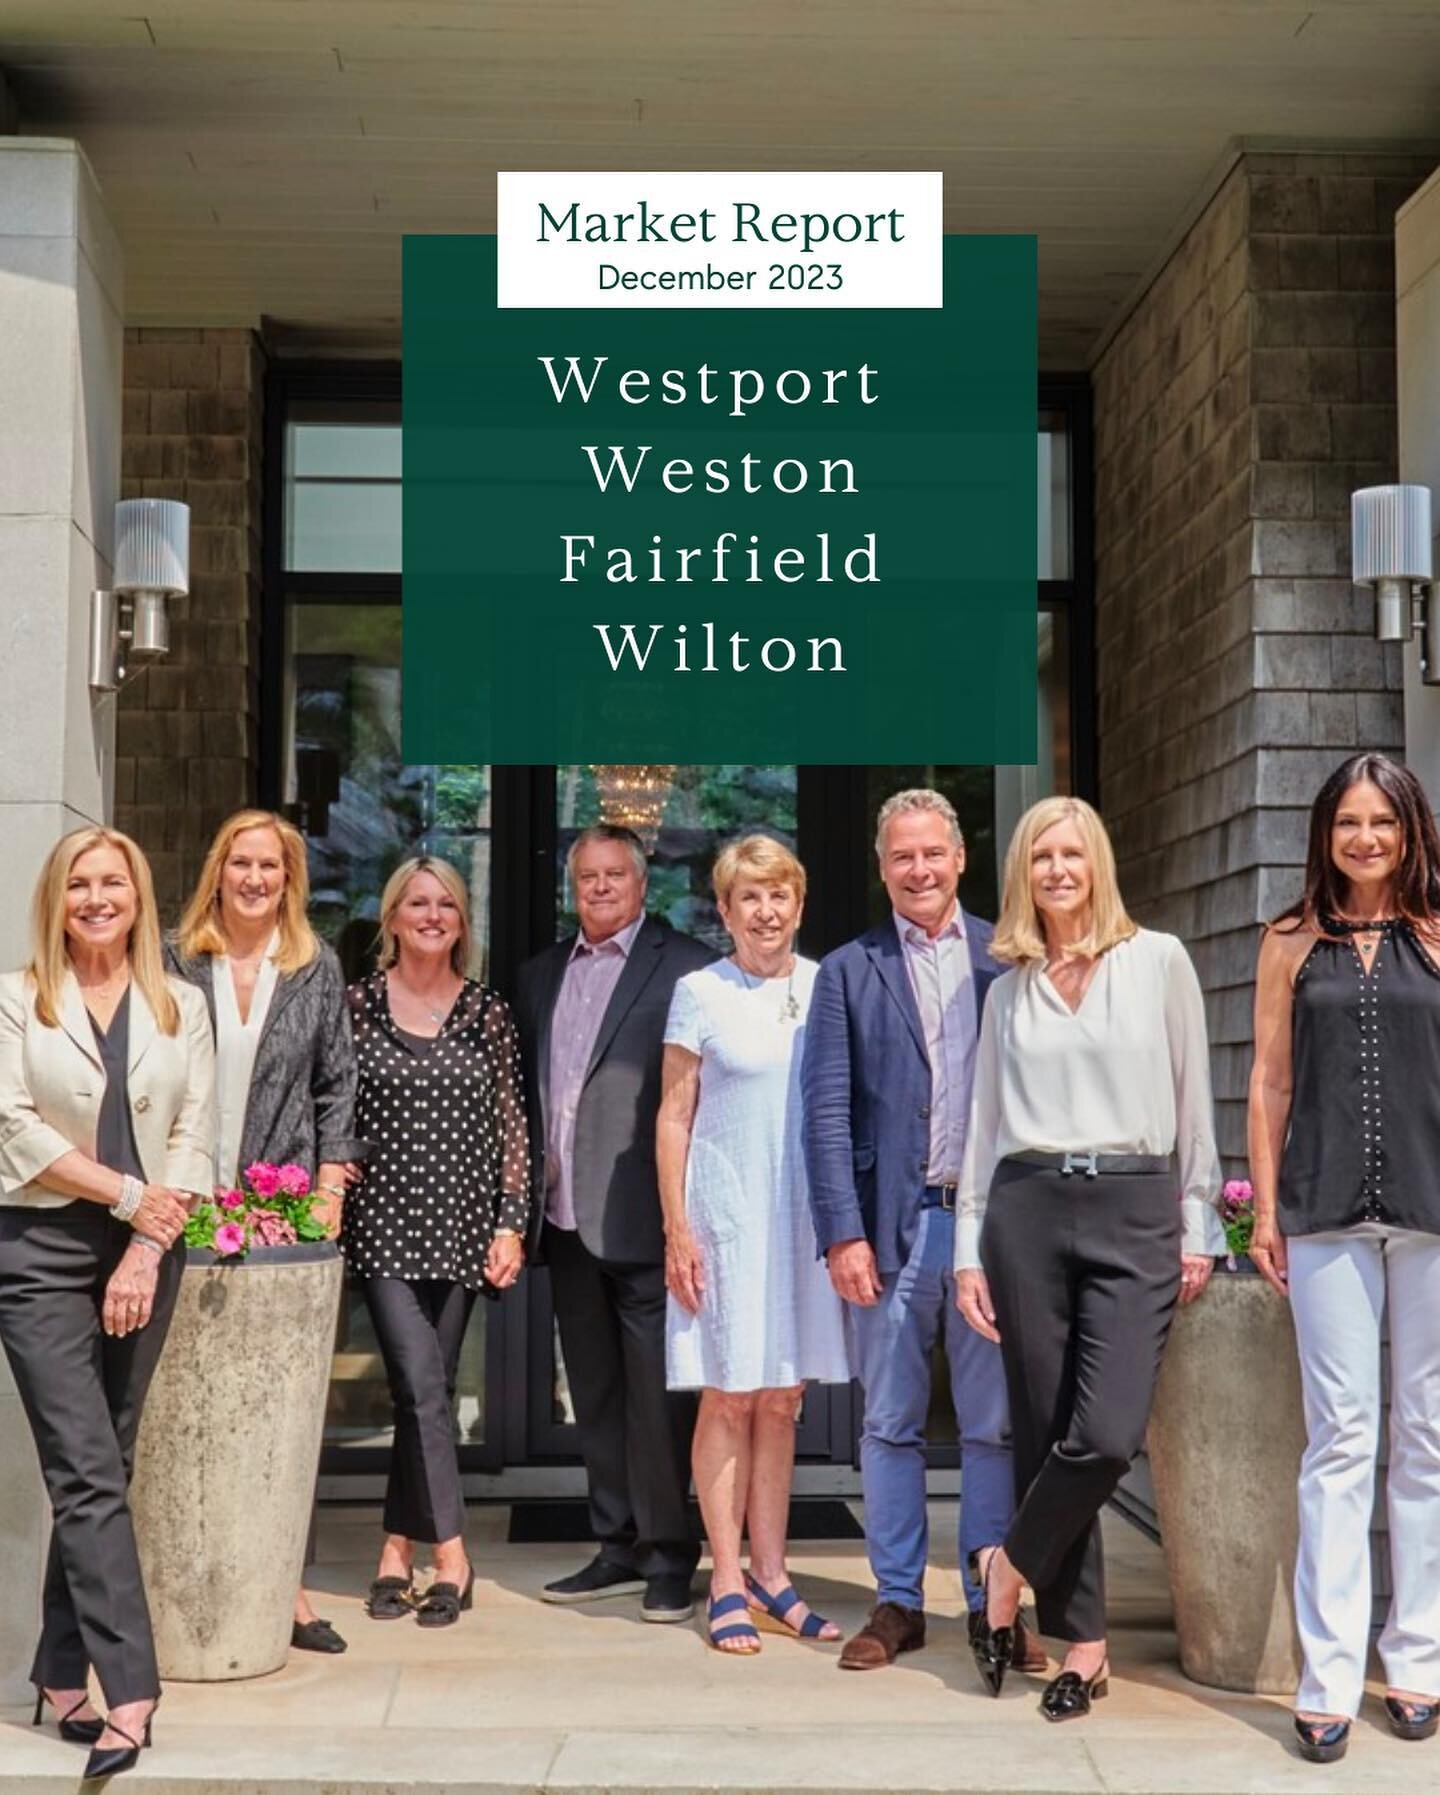 CT Market Report | December 2023⁠
⁠
Winter is officially here! With snow on the ground in CT, we have your monthly real estate market report ready. ⁠Let&rsquo;s take a look at how the Fairfield County market fared during the December holiday season. 